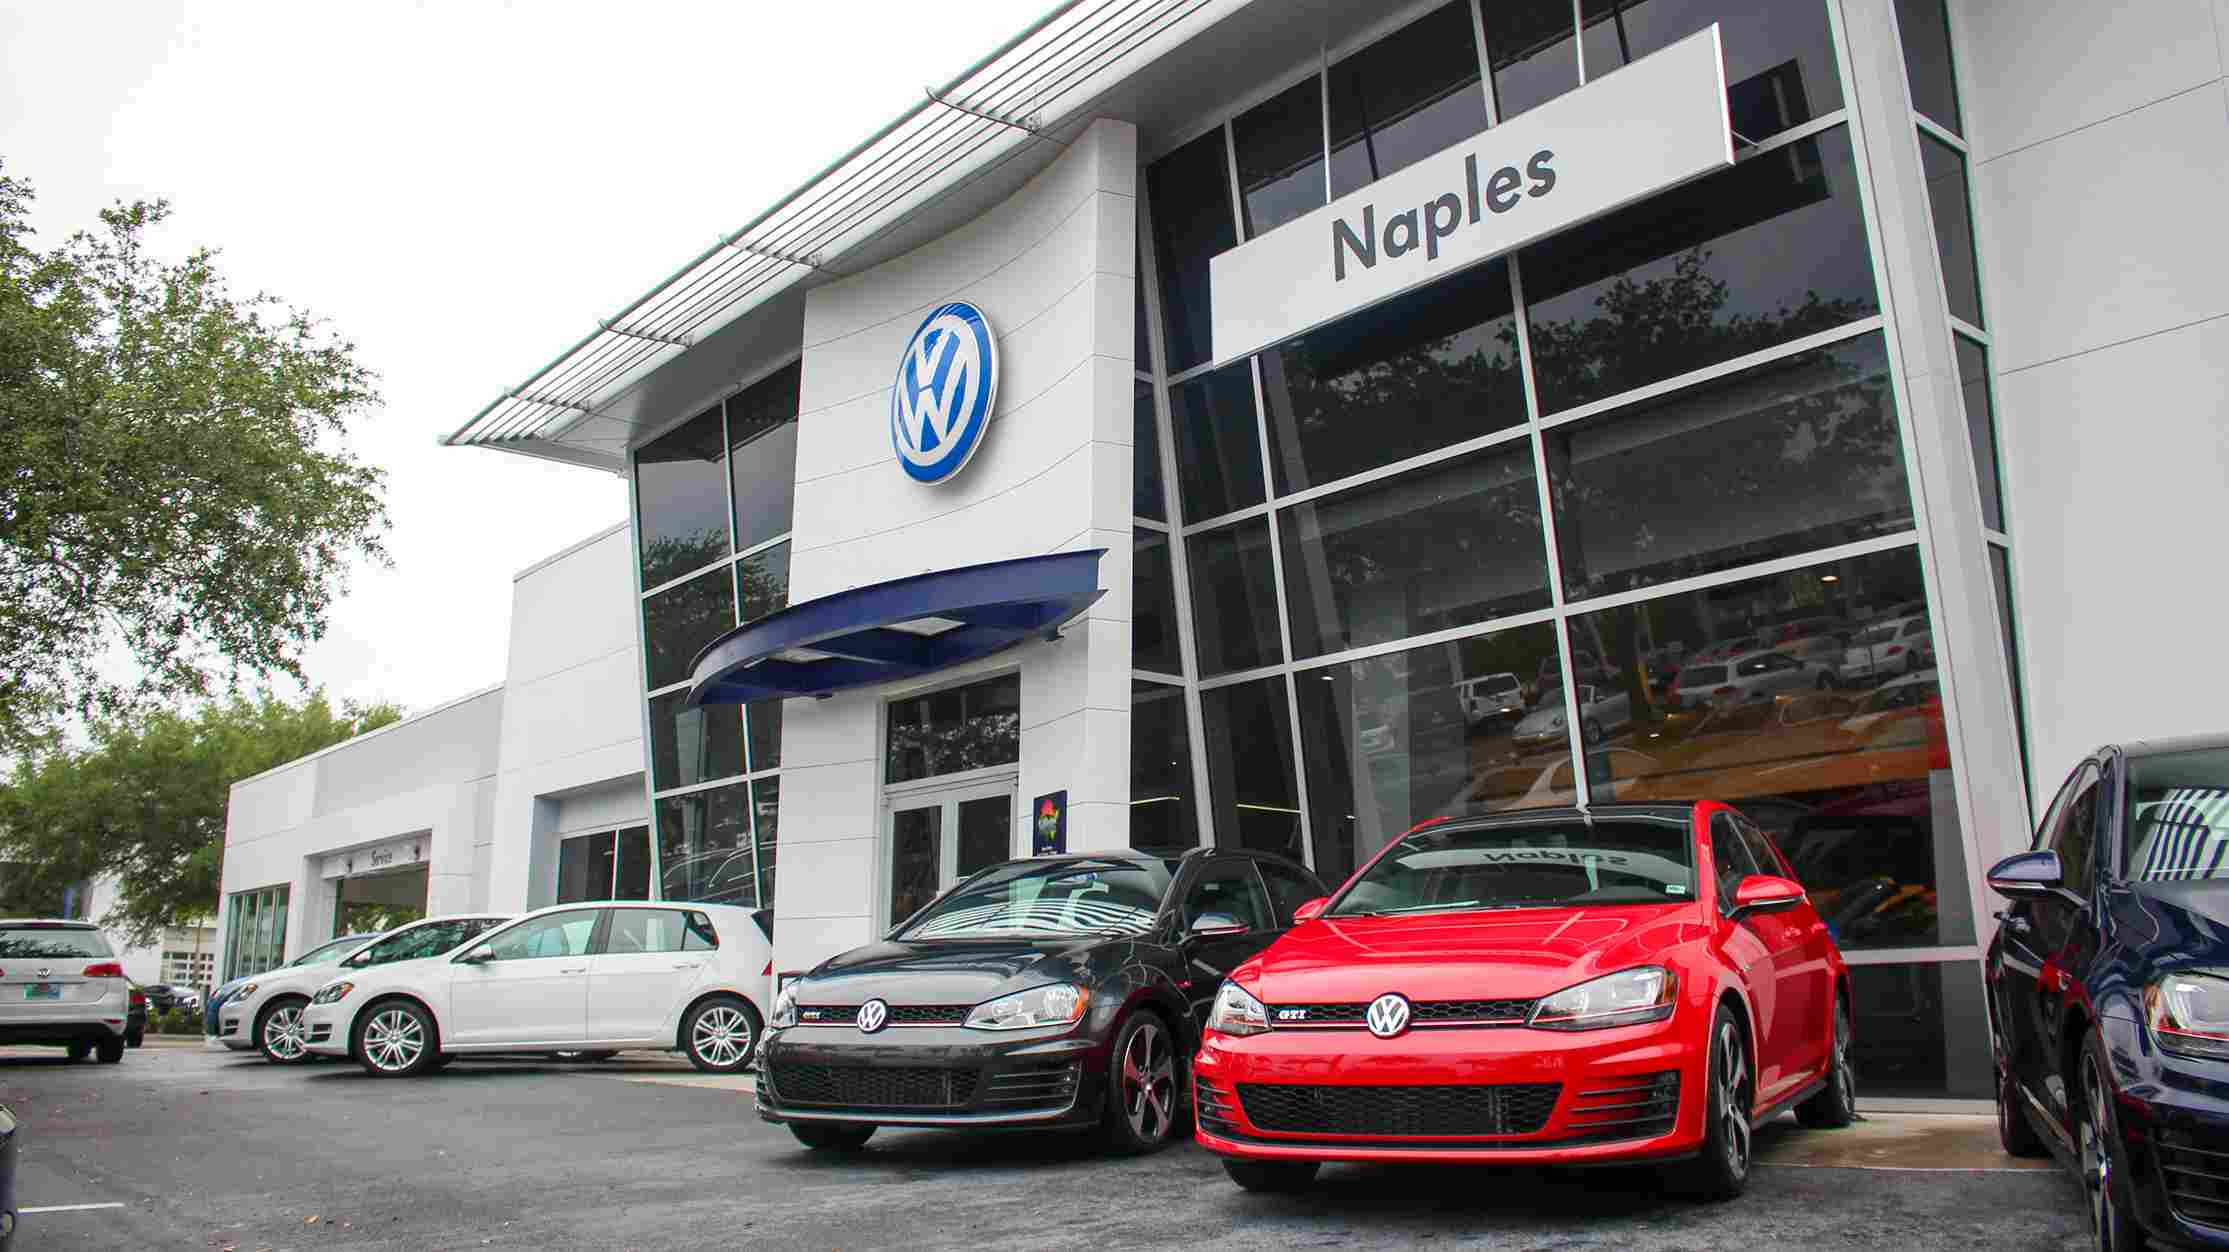 Volkswagen of Naples is your home for new and used Volkswagen sales and service. Visit One of Naples's Premier Volkswagen Dealerships today!